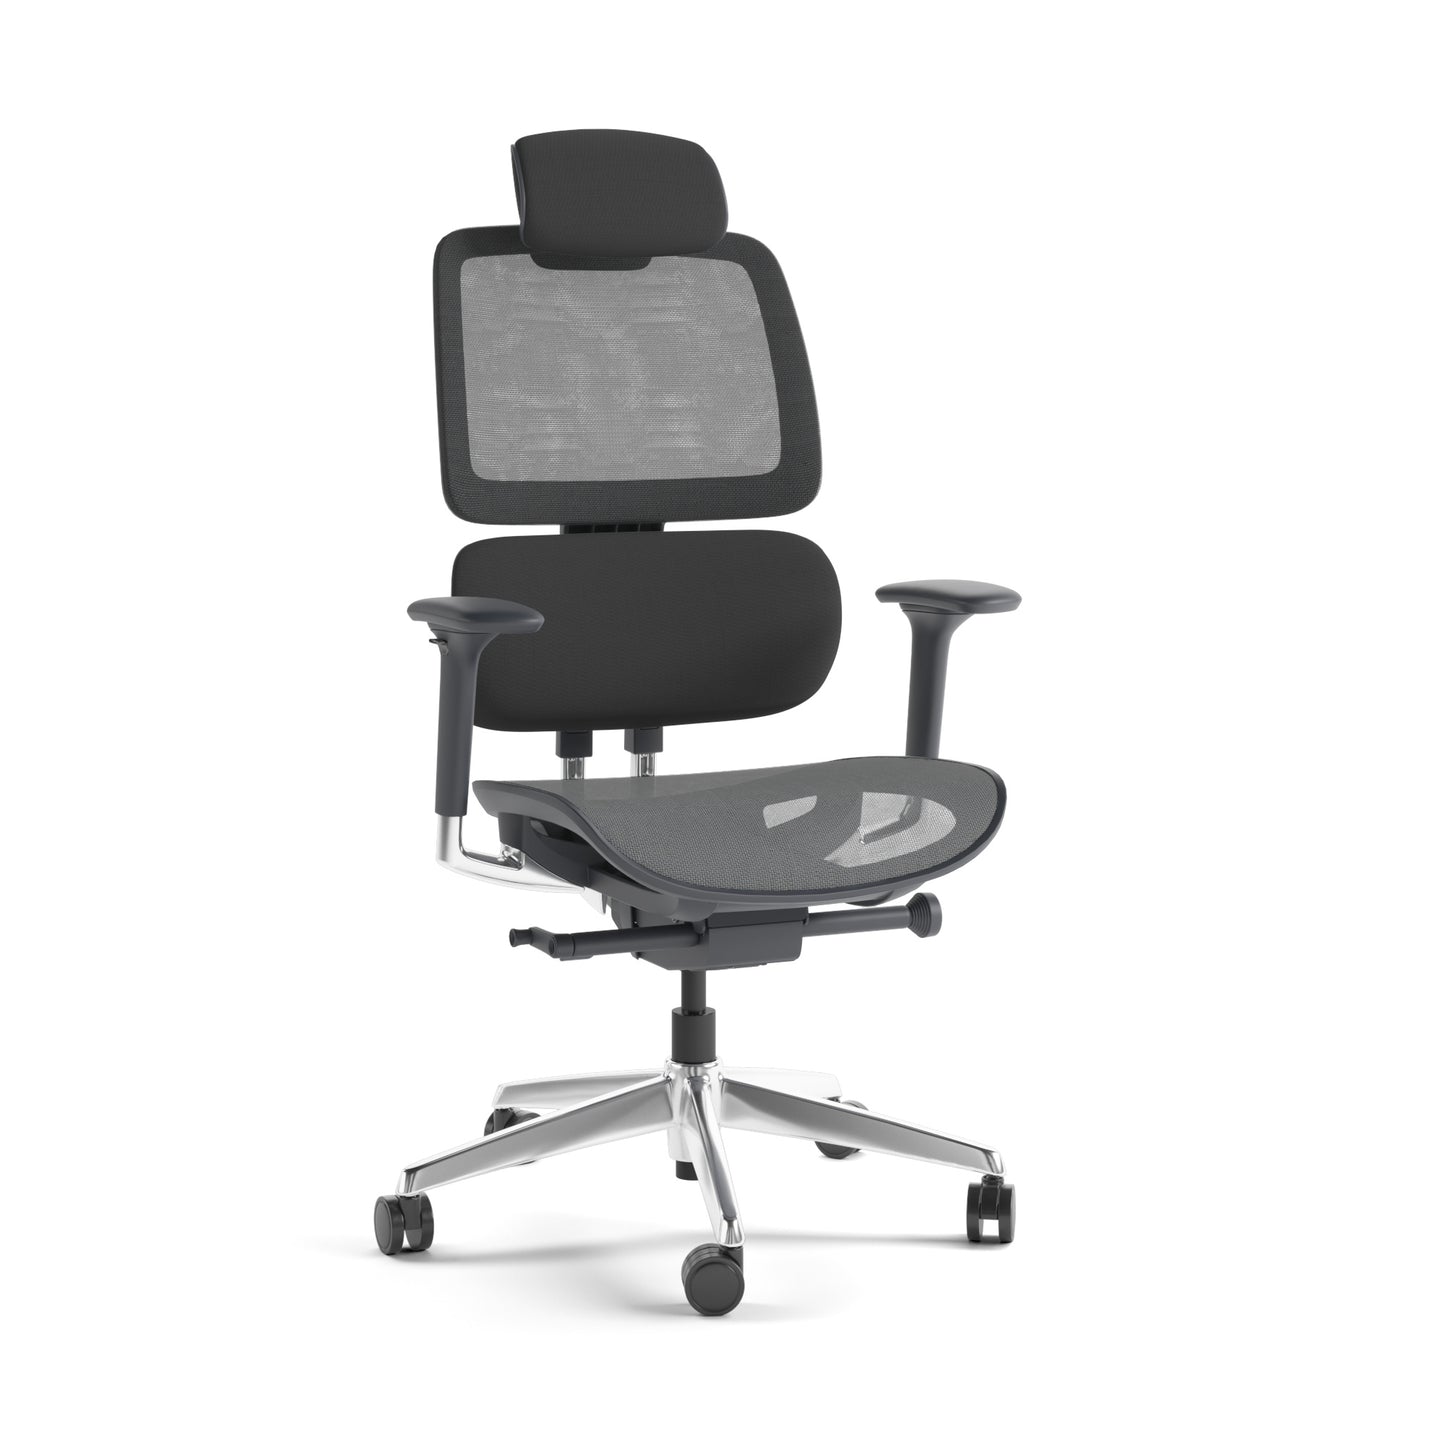 Voca 3501 Office, Gaming & Task Chair